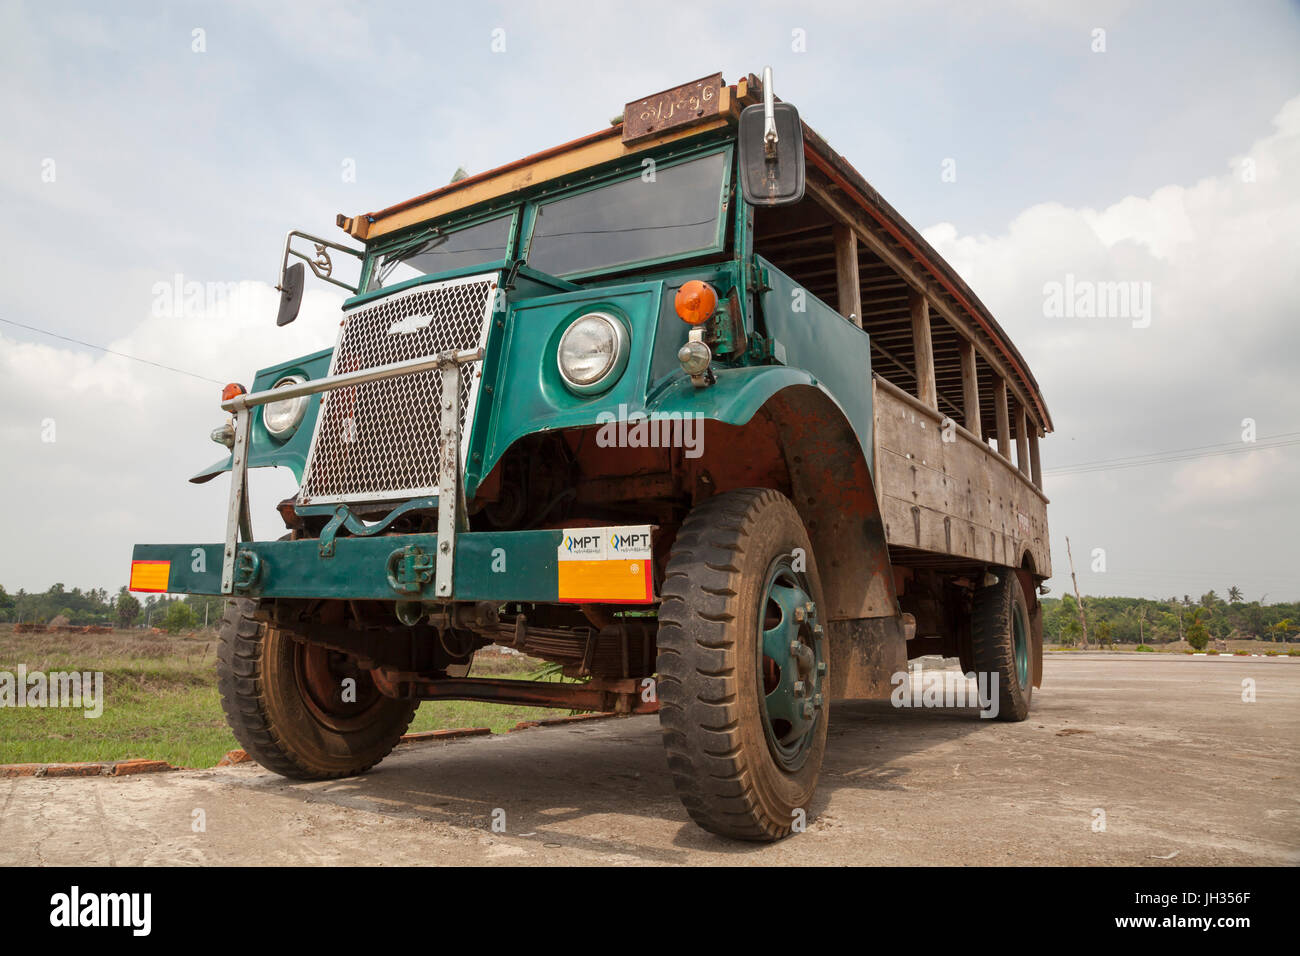 Vintage bus still in use in Myanmar. Modified from a WW2 ex British army Canadian Military Pattern Chevrolet C60 truck. Mon State, Myanmar Stock Photo